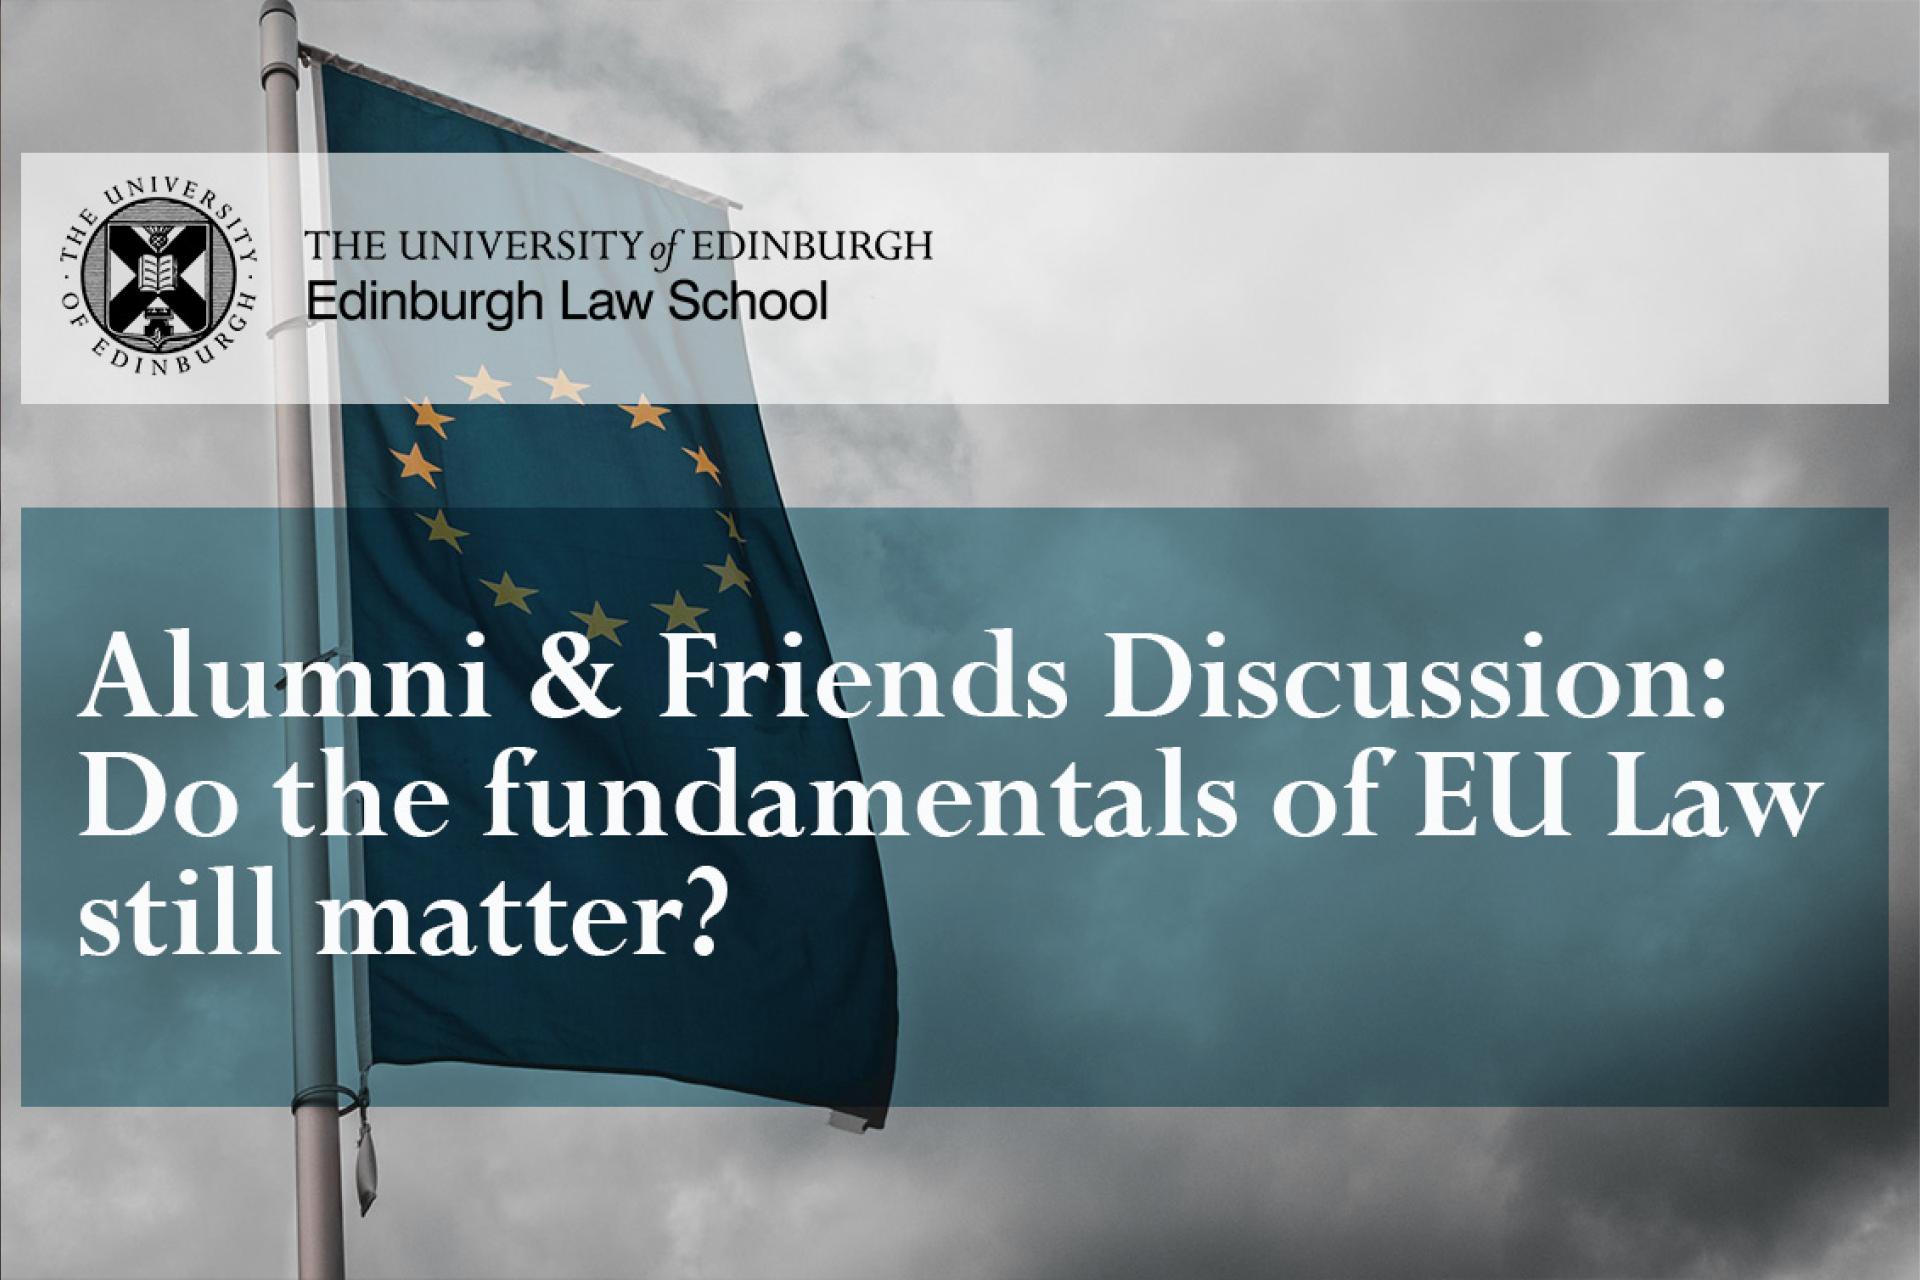 Alumni and Friends Discussion: Do the Fundamentals of EU Law still matter? Blue and Yellow EU Flag on black and white image of the sky